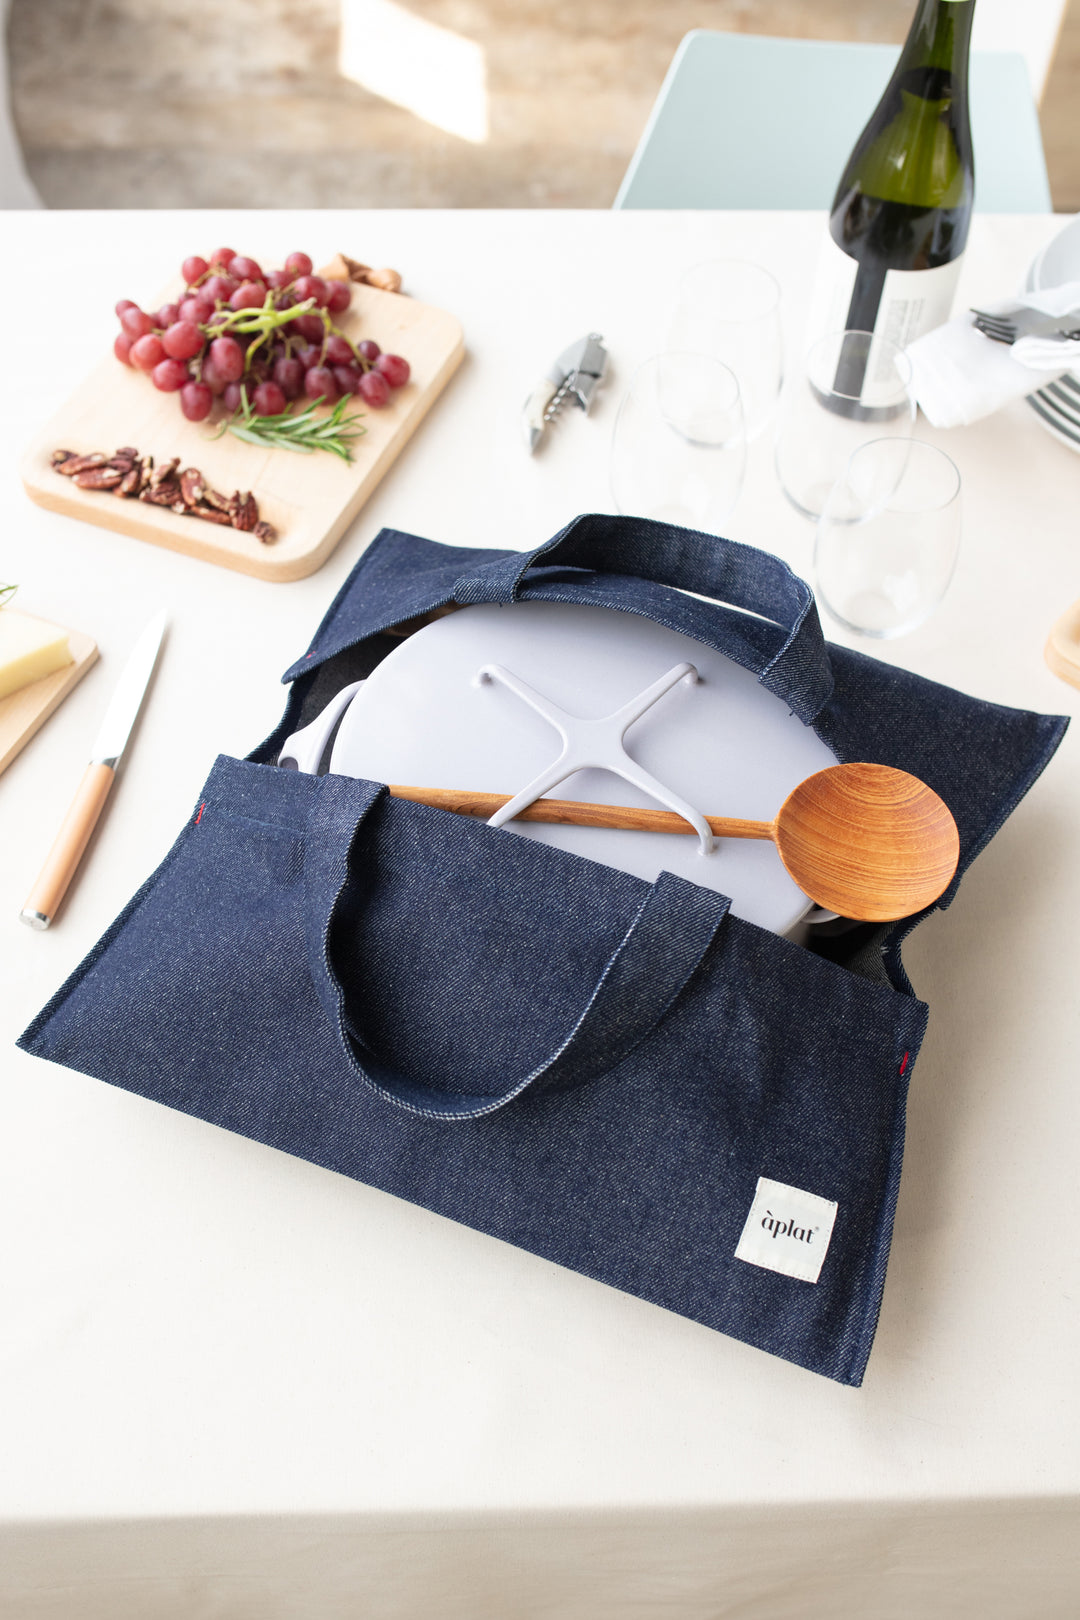 Bring potluck dishes with ease and style in our reusable cookware tote.